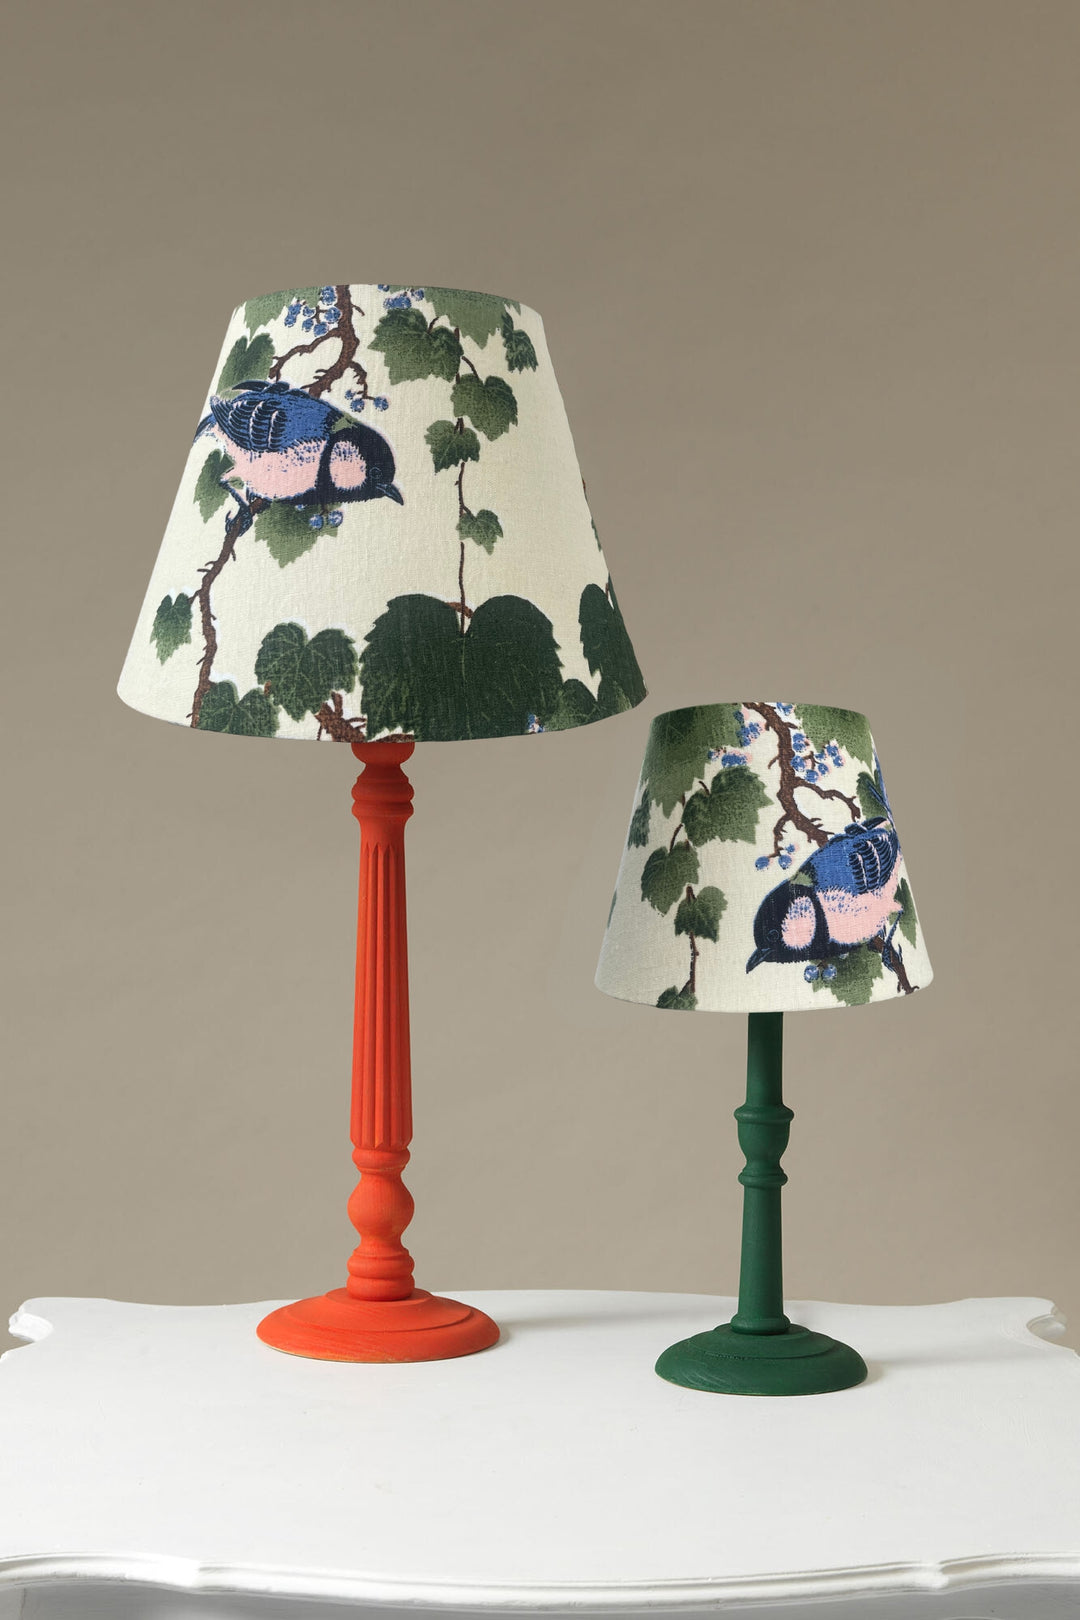 Two sizes of lampshades for winter autumn with green maple leaf pattern on a cream background by One Hundred Stars